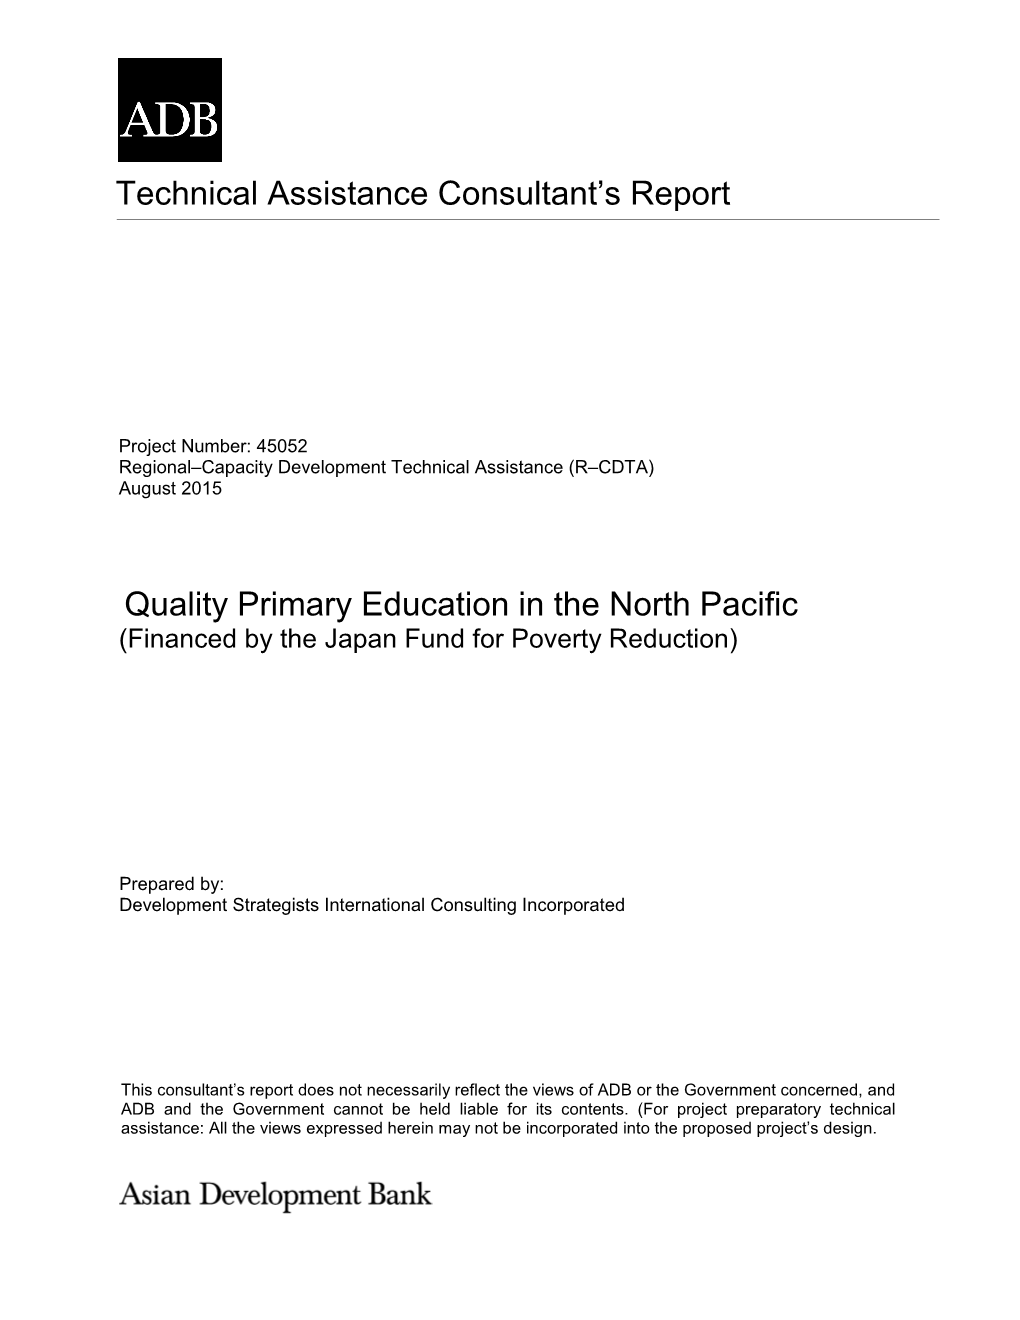 45052-001: Technical Assistance Consultant's Report